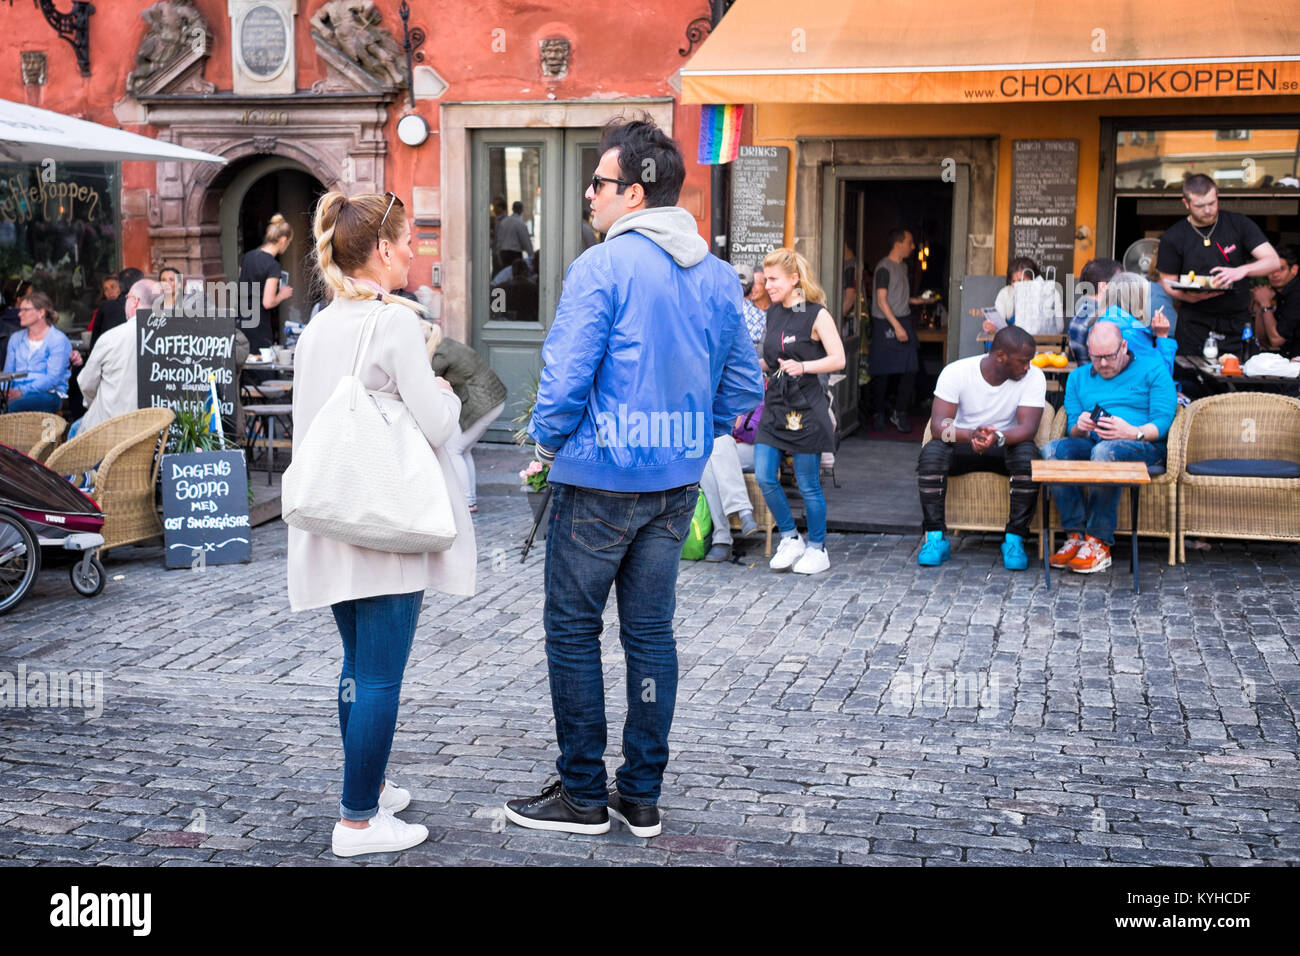 Stockholm sidewalk cafes in the picturesque historic neighborhood of Gamla Stan, also called Old Town. Couple in the foreground deciding where to eat. Stock Photo